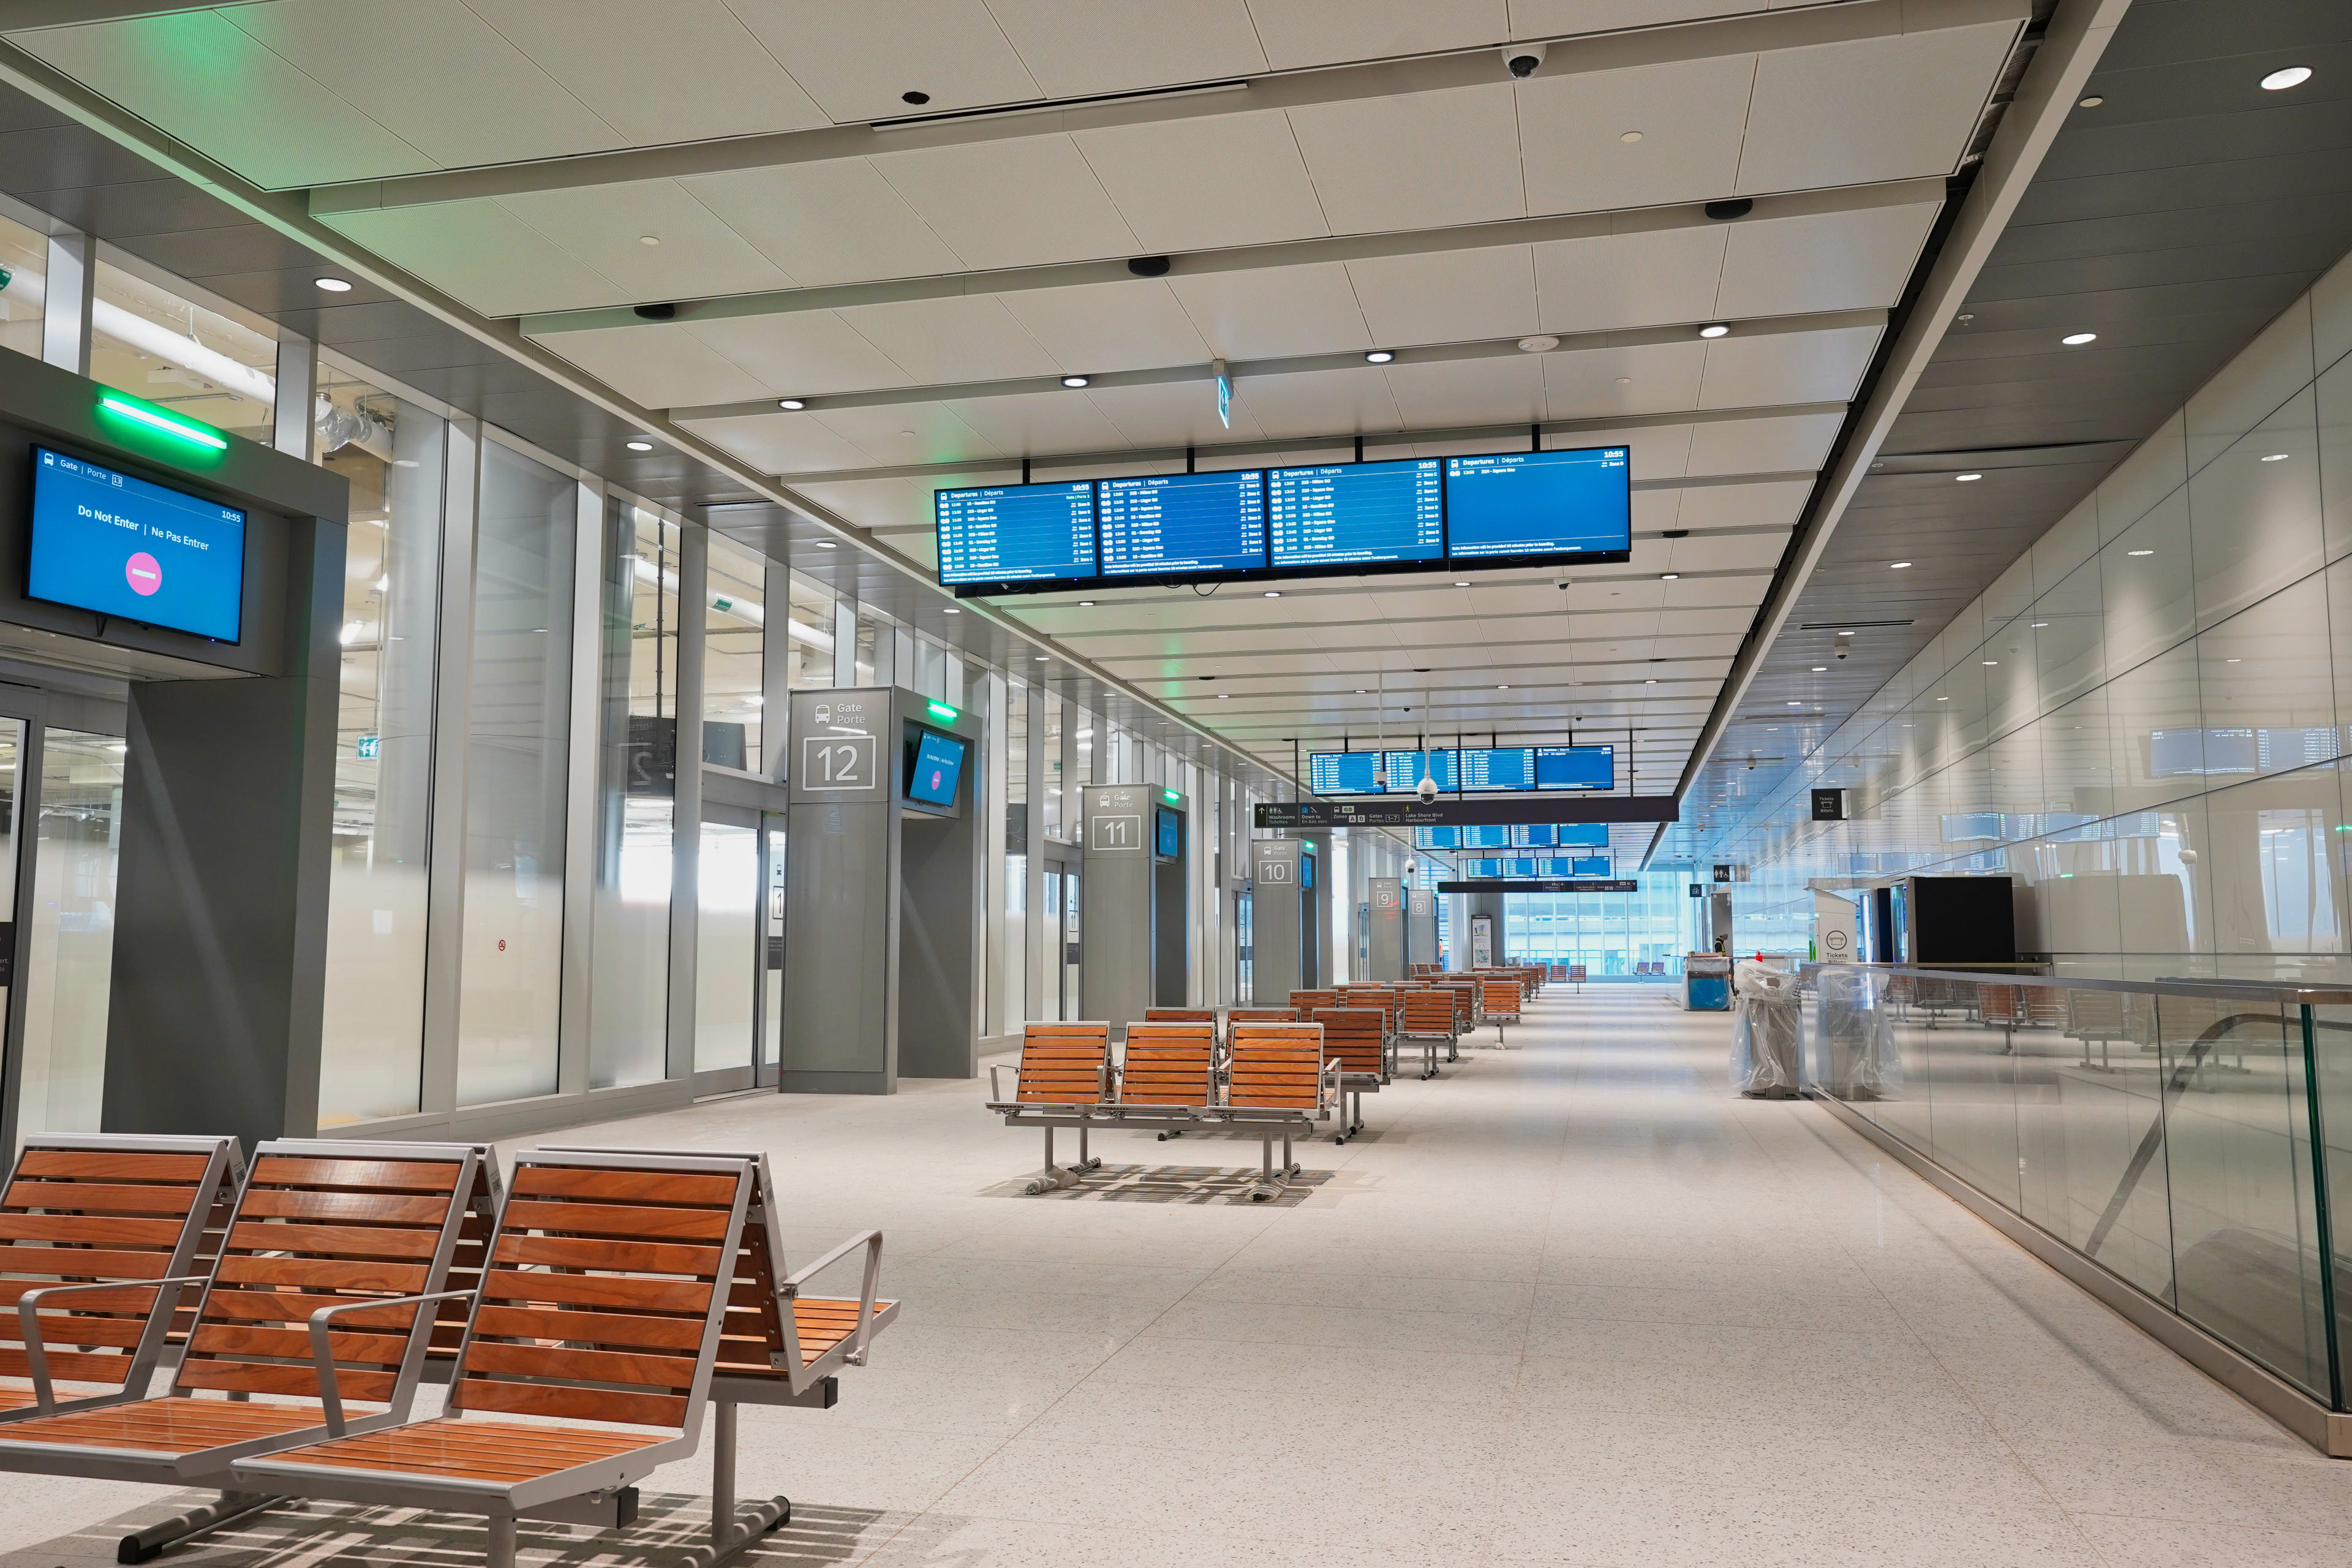 Interior of the new bus terminal with departure gates and benches and screens